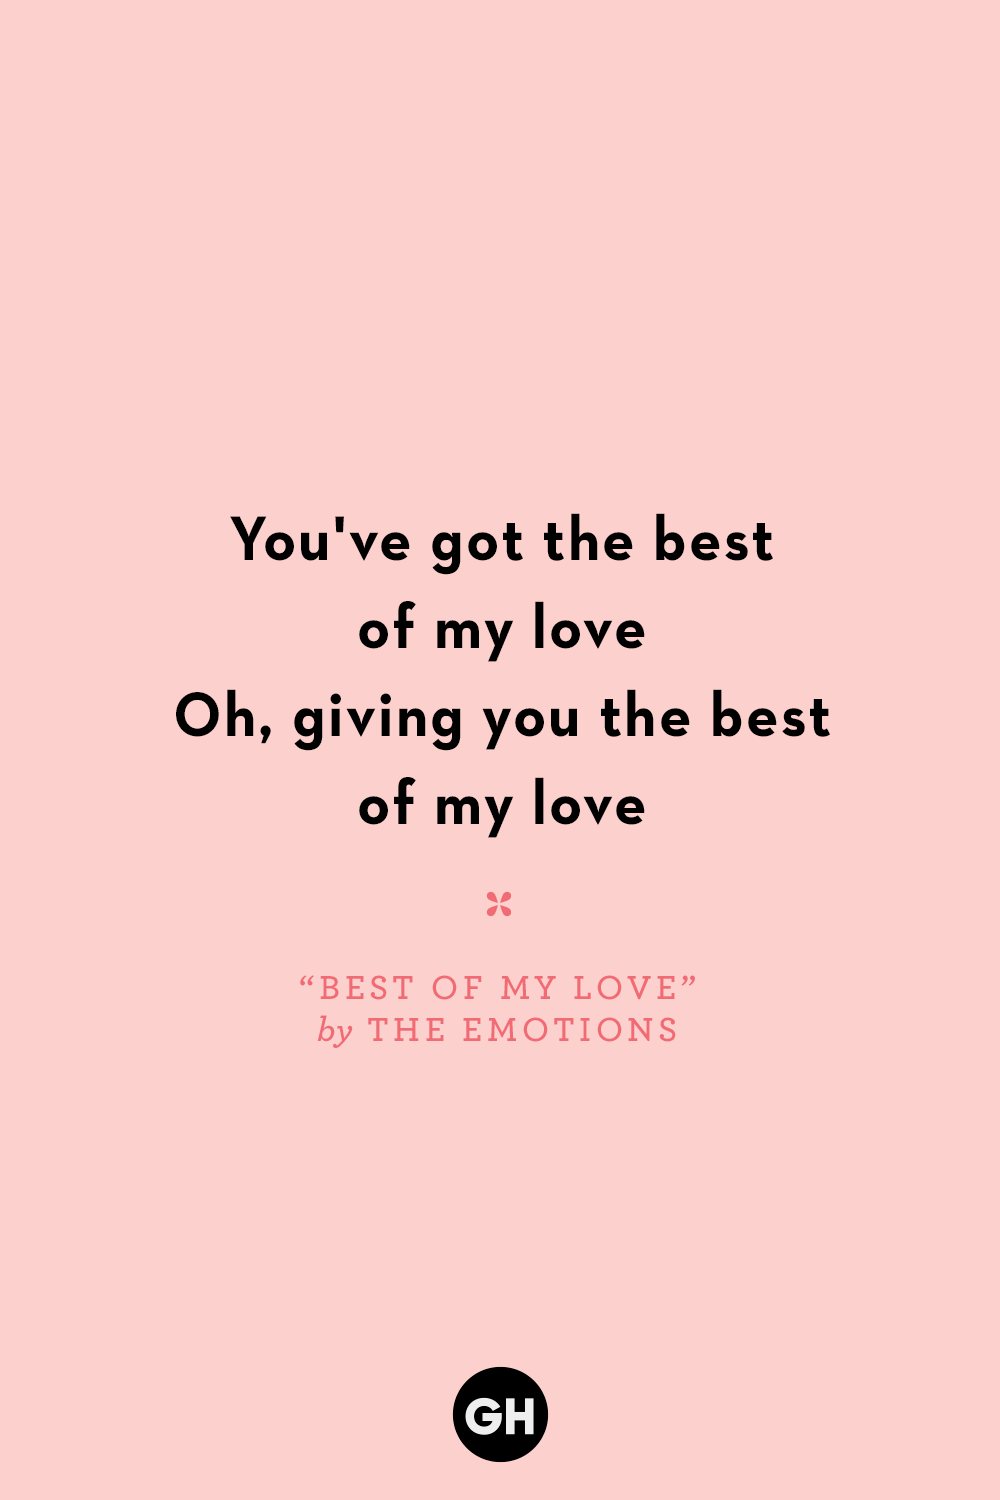 love quotes from songs